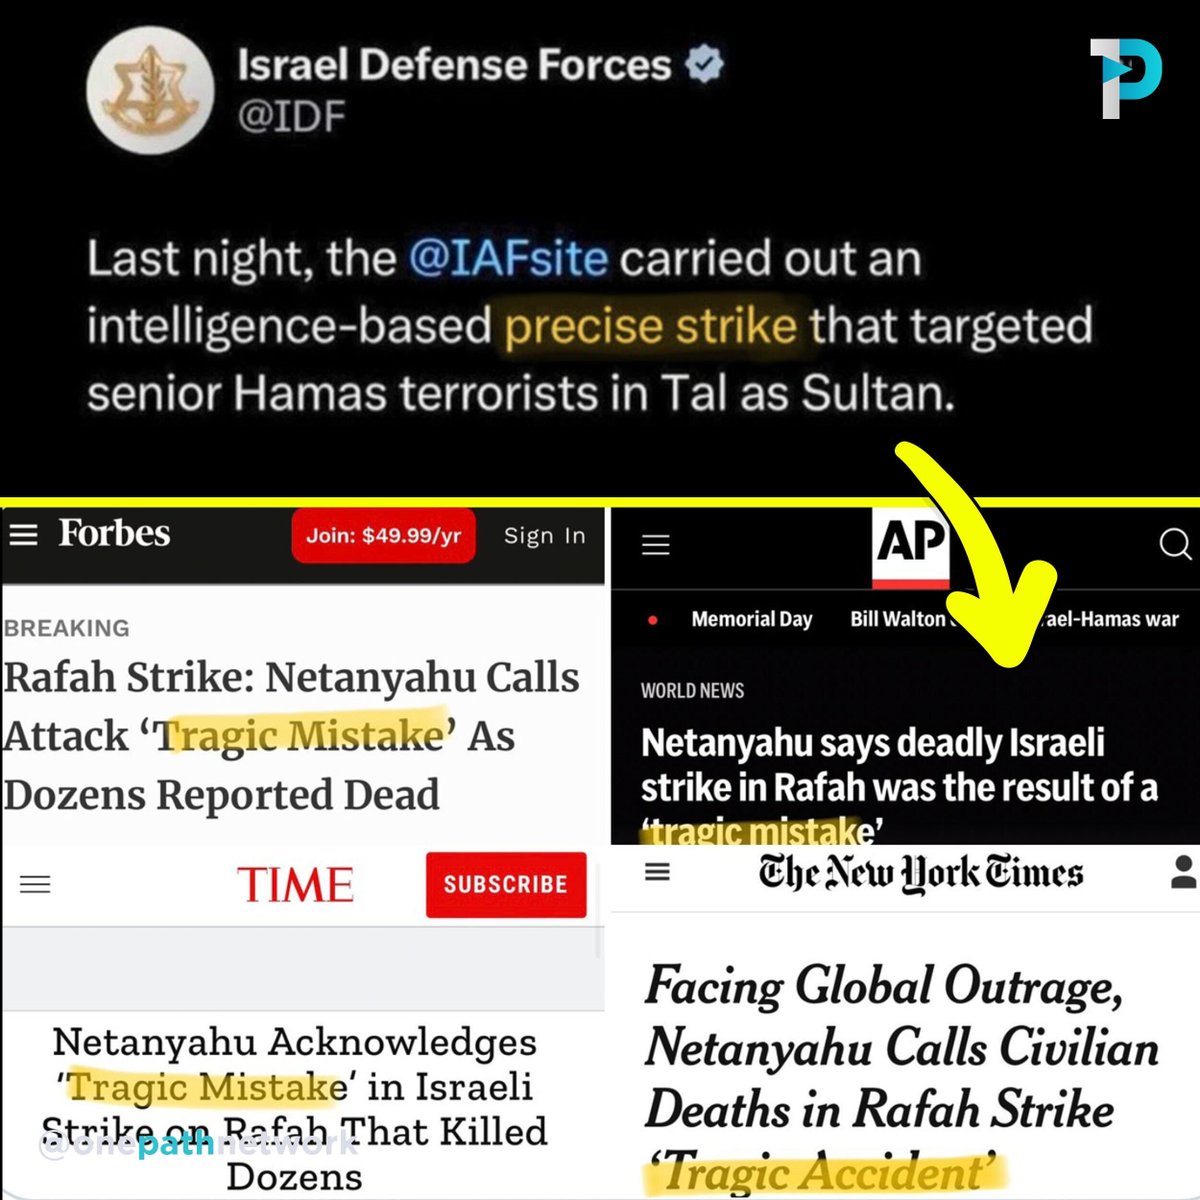 🇮🇱 Yesterday, IDF bragged about using AI precise strikes on tents in Rafah. Today, Netanyahu calls the Rafah tent massacre a 'tragic mistake' while simultaneously ordering increased bombing of Rafah. #RafahOnFıre